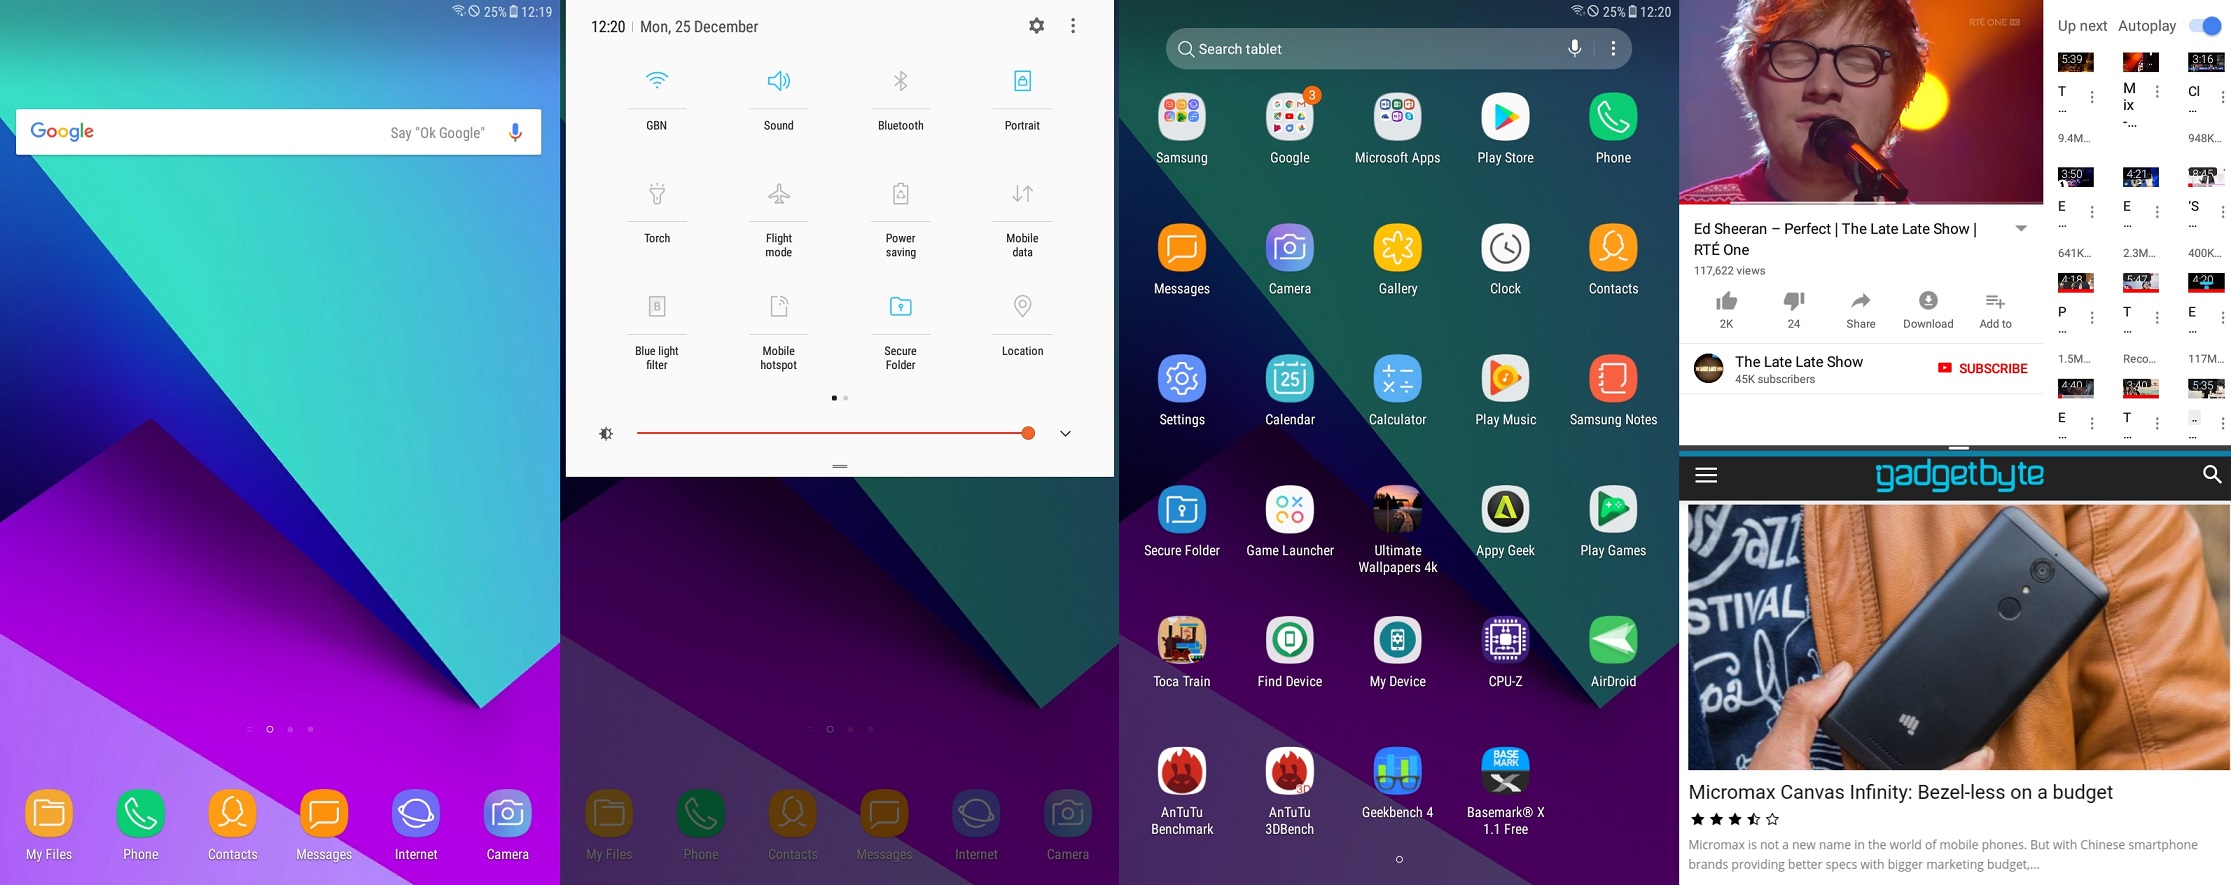 samsung tab a 2017 UI software review